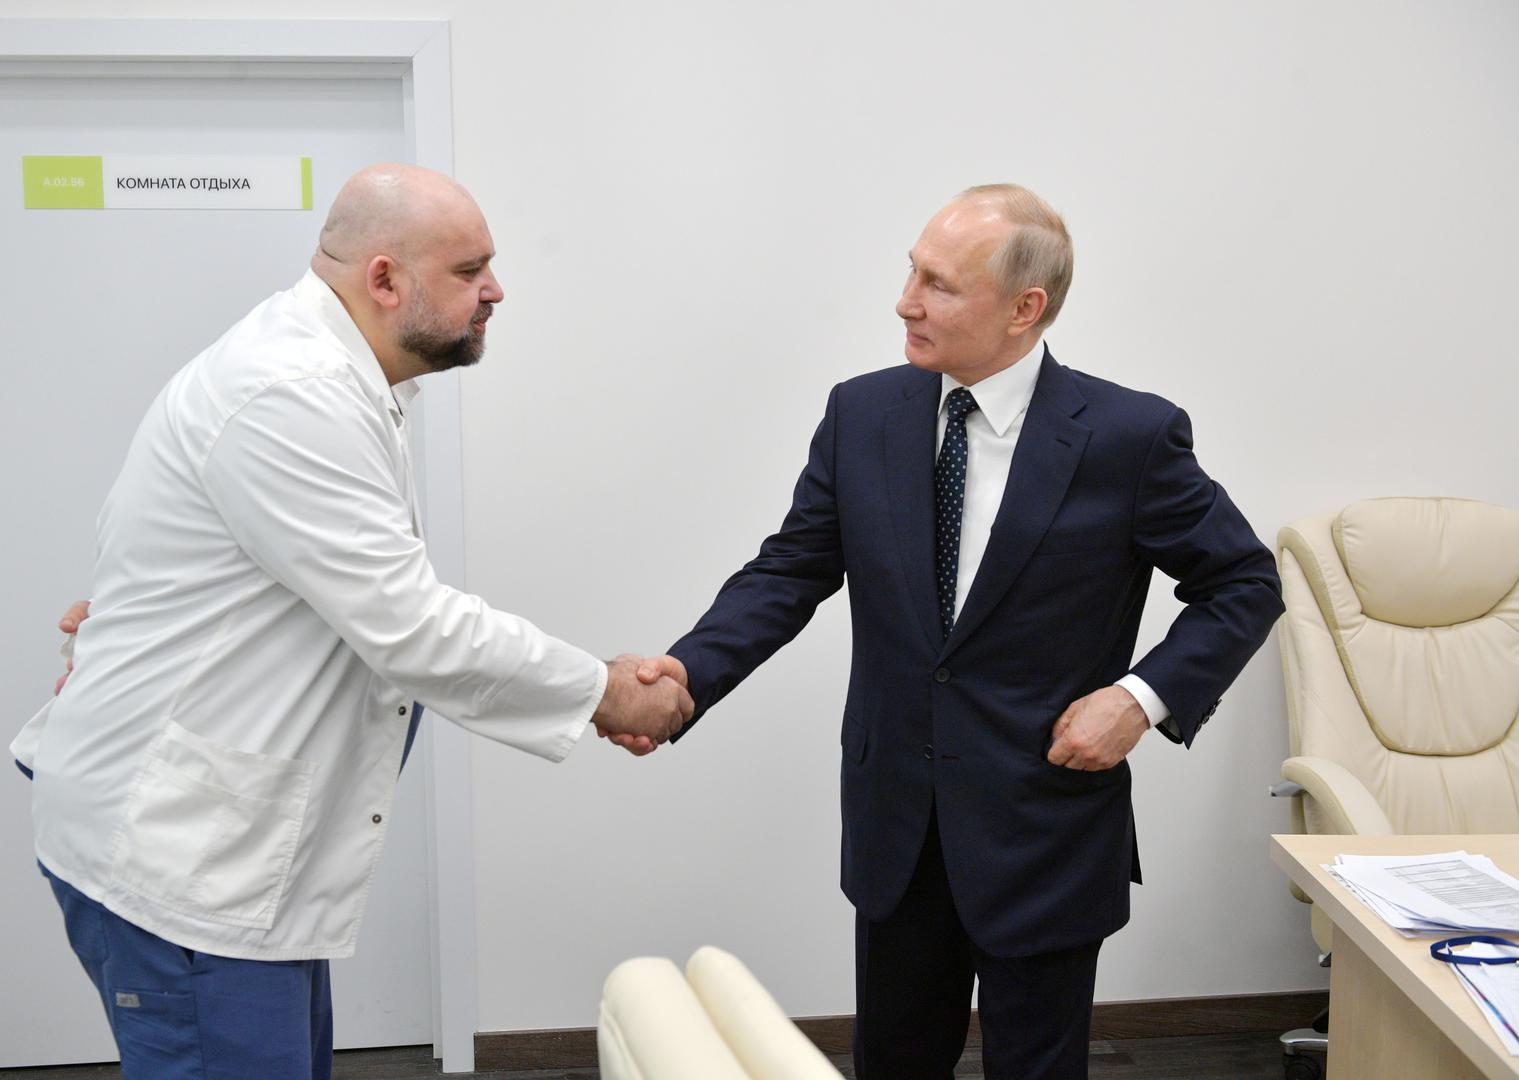 Russian President Putin visits a hospital for patients infected with coronavirus disease (COVID-19) on the outskirts of Moscow Russian President Vladimir Putin shakes hands with the hospital's chief physician Denis Protsenko during a visit to the hospital for patients infected with coronavirus disease (COVID-19), on the outskirts of Moscow, Russia March 24, 2020. Sputnik/Alexey Druzhinin/Kremlin via REUTERS ATTENTION EDITORS - THIS IMAGE WAS PROVIDED BY A THIRD PARTY. SPUTNIK